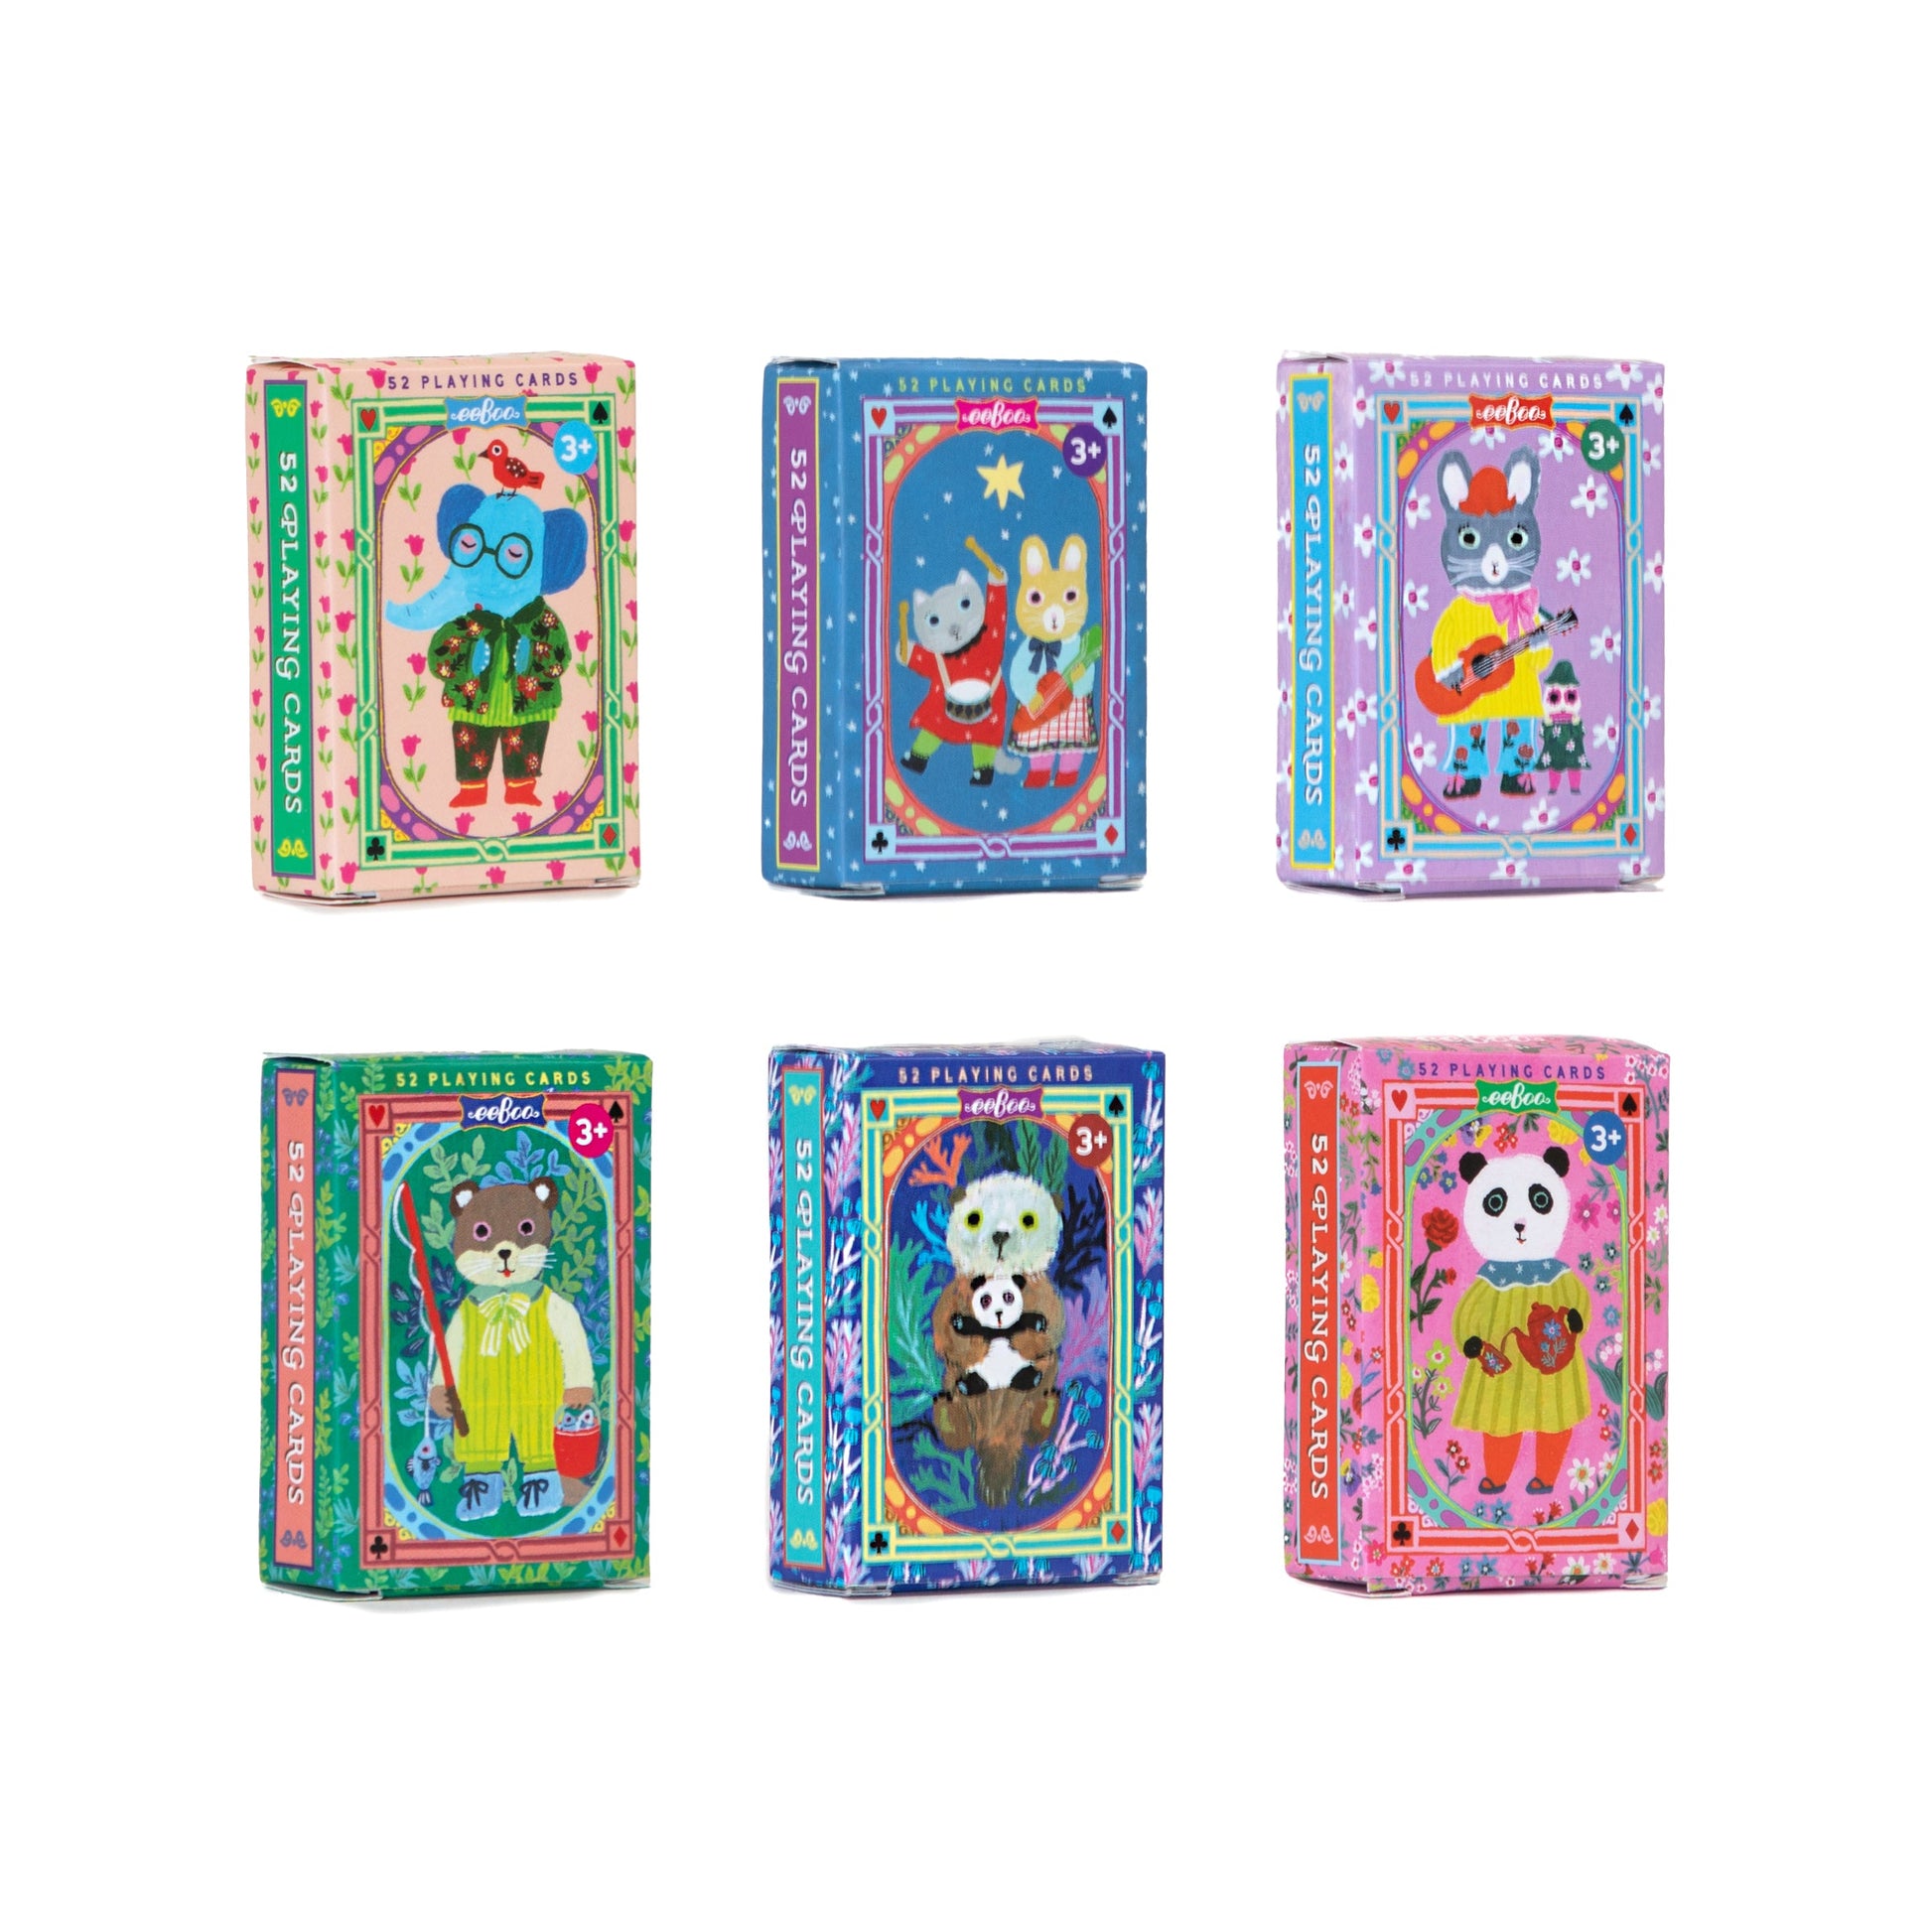 Yumi Tiny Playing Cards Assortment by eeBoo | Unique Fun Gifts